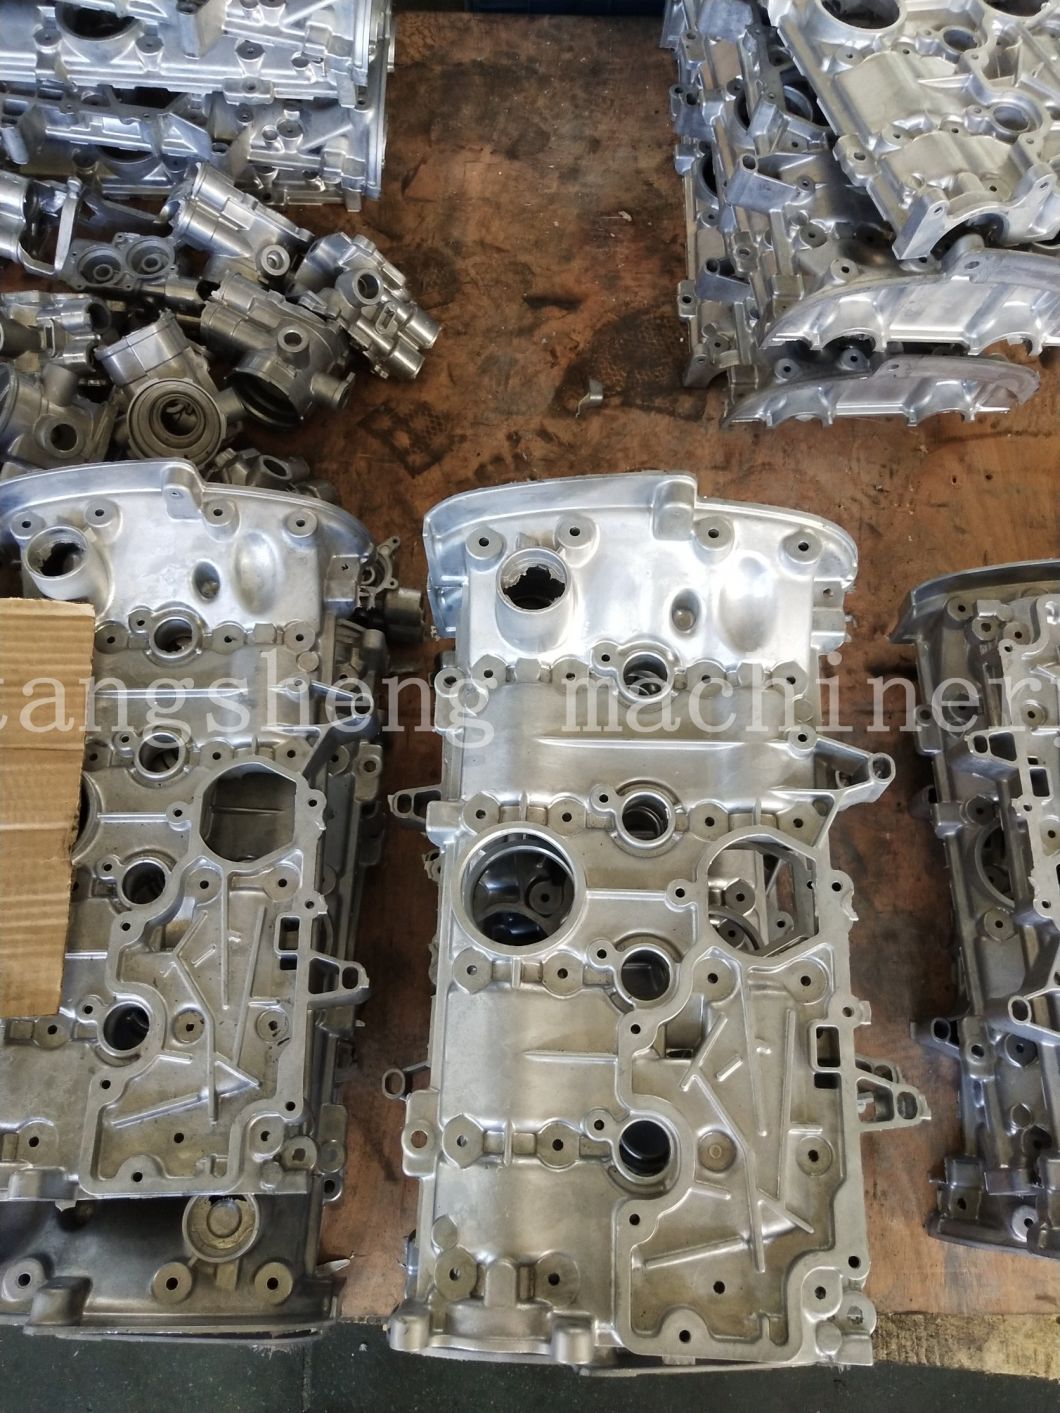 Supply Vacuum Pumping Aluminum Die-Casting Baking Tray and Open Die-Casting Mold, Aluminum Pan of Various Sizes